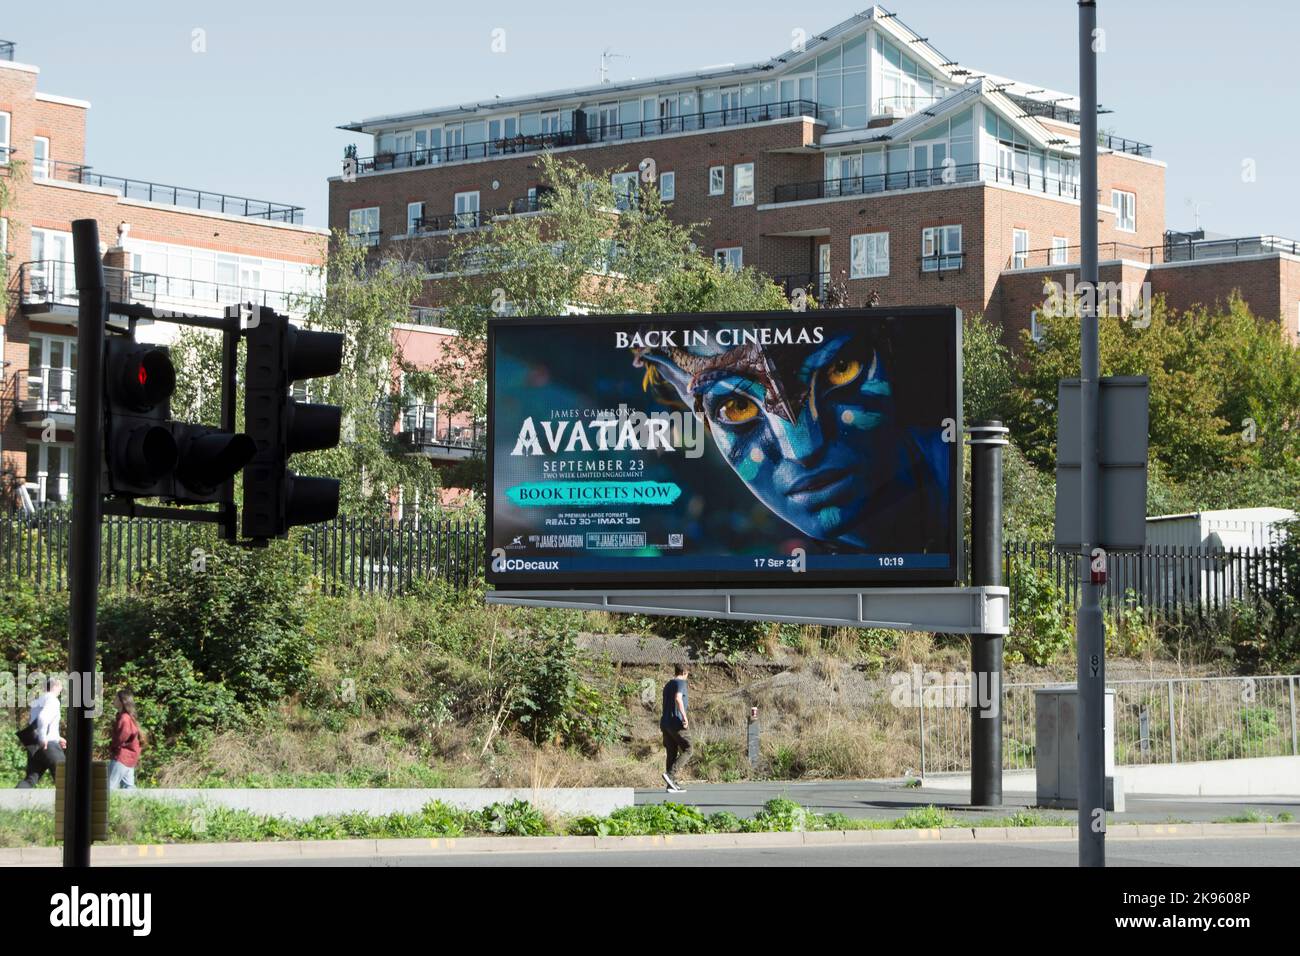 digital billboard advertising a new high definition release of the film avatar, in kingston upon thames, surrey, england Stock Photo